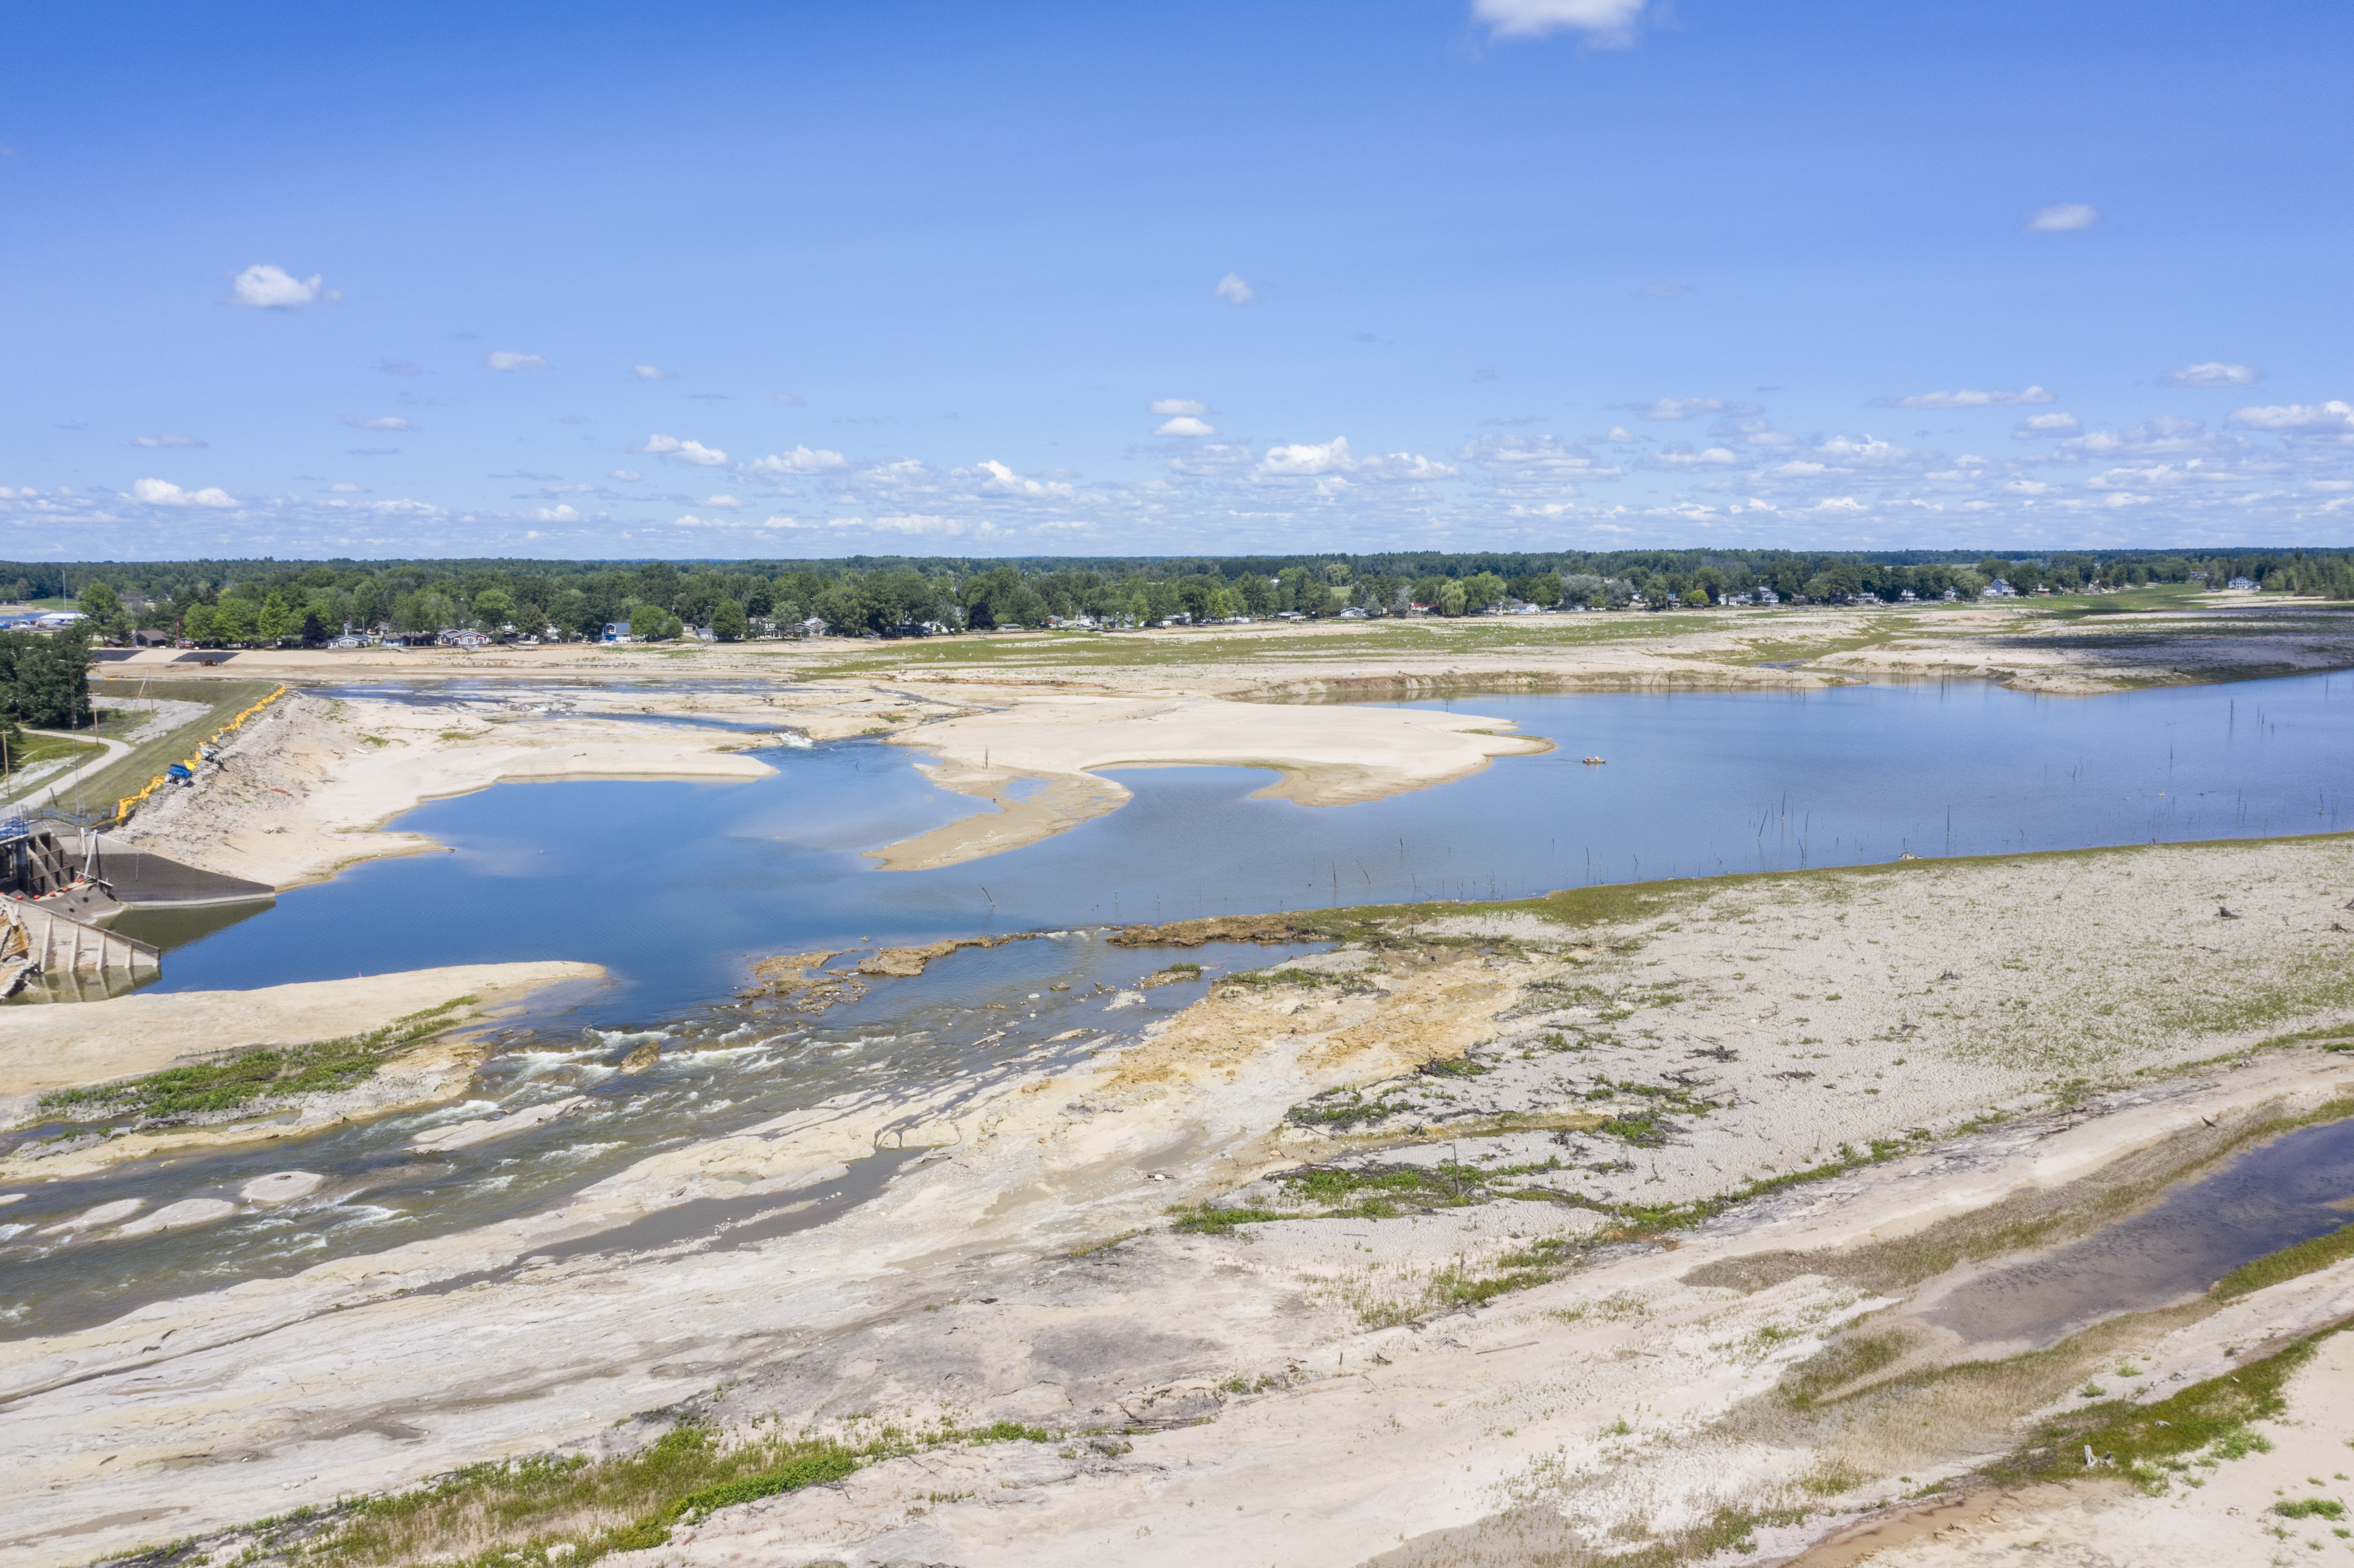 A view of what's left of Wixom Lake in Hope Township on Thursday, July 30, 2020. The devastating flood in May due to the failure of the Edenville and Sanford Dam left Wixom and Sanford Lake nearly empty. (Kaytie Boomer | MLive.com)